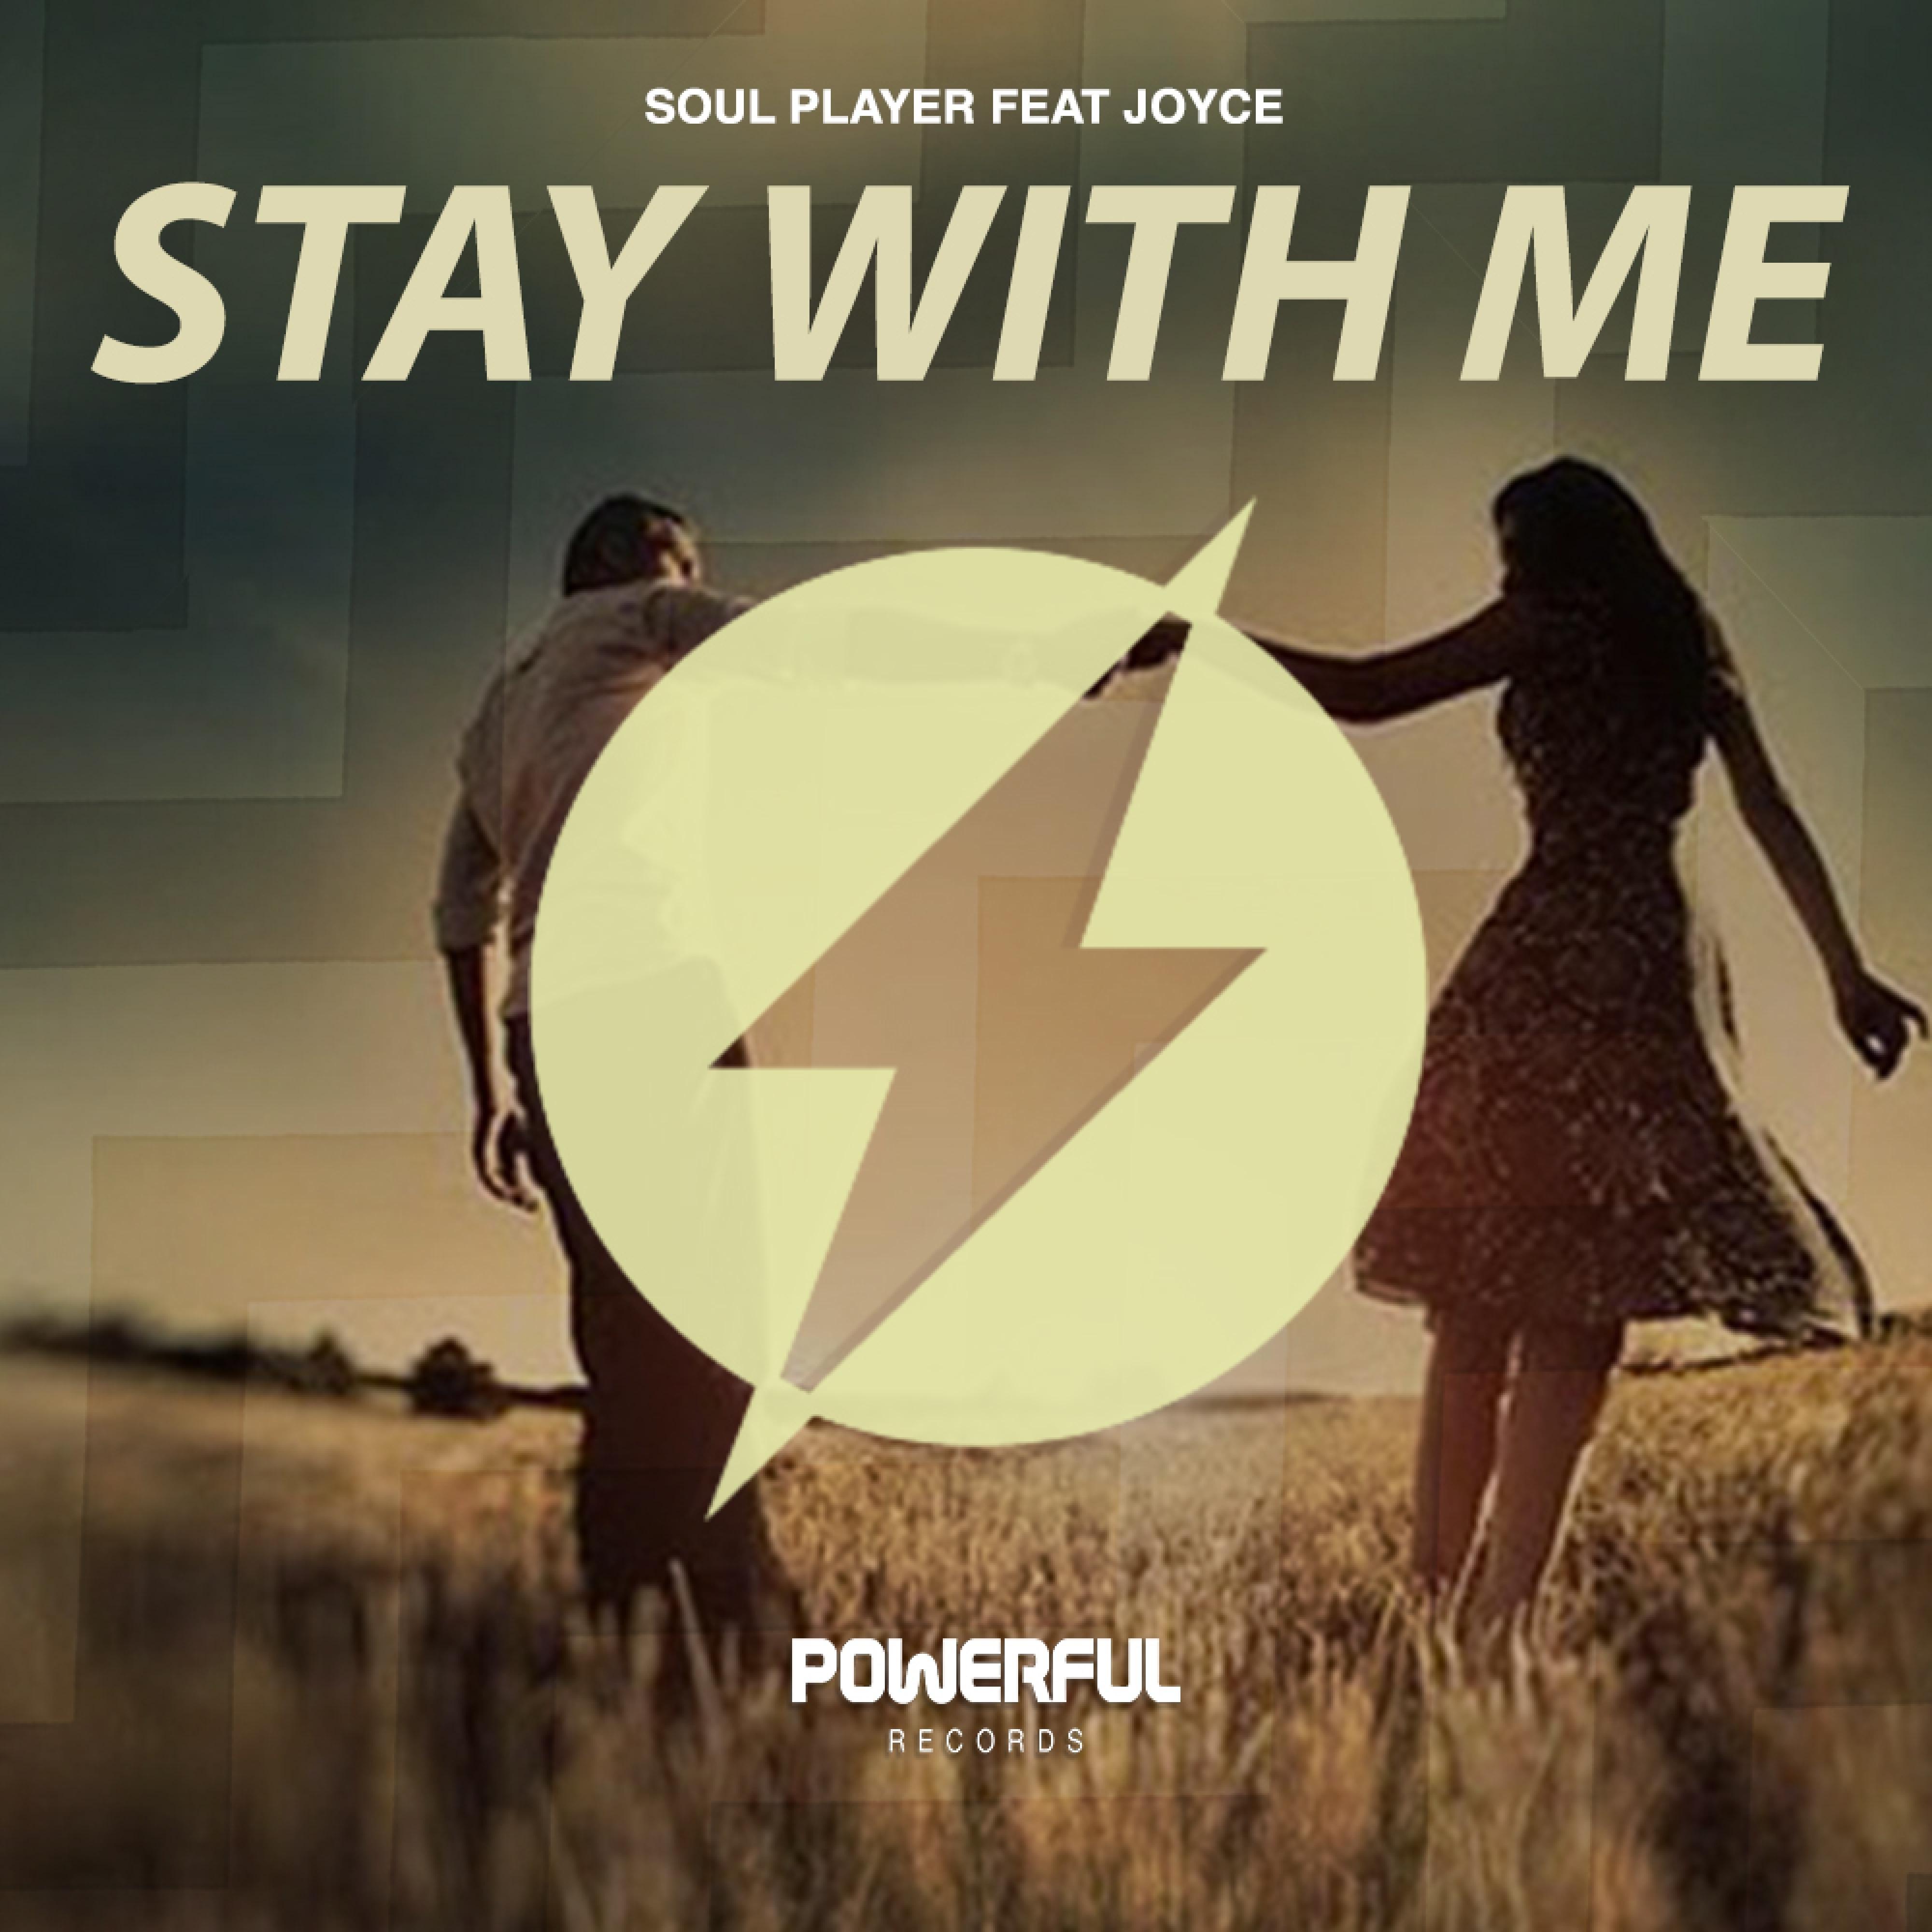 Stay with me now. Stay with me. Player Soul. Stay with me Song. Stay with me группа.